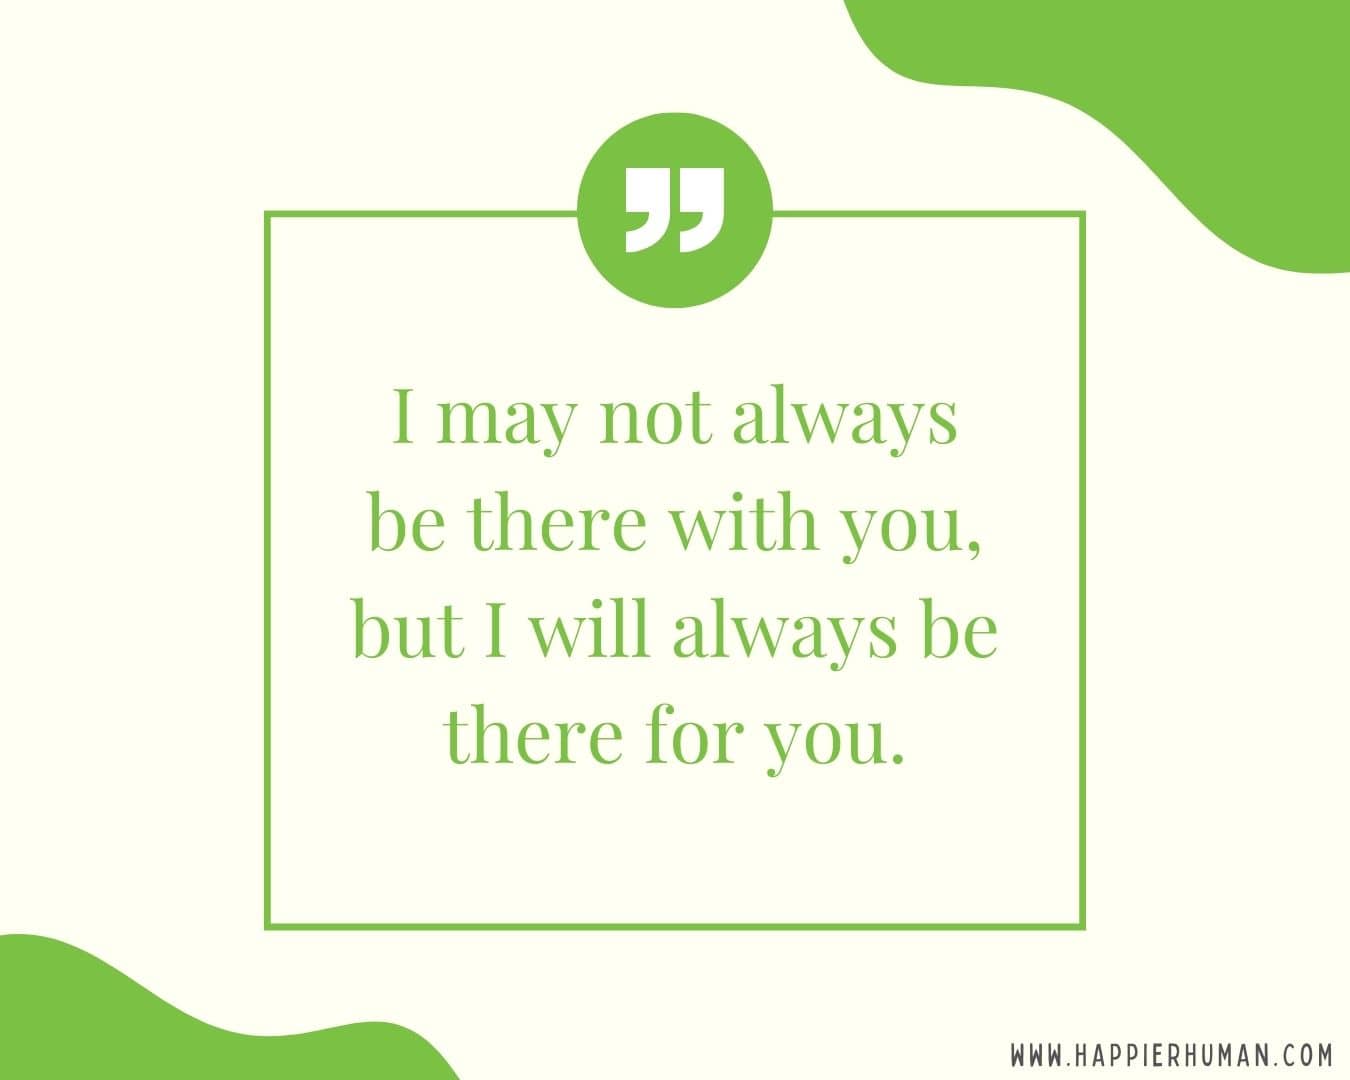 I’m Here for You Quotes - “I may not always be there with you, but I will always be there for you.”